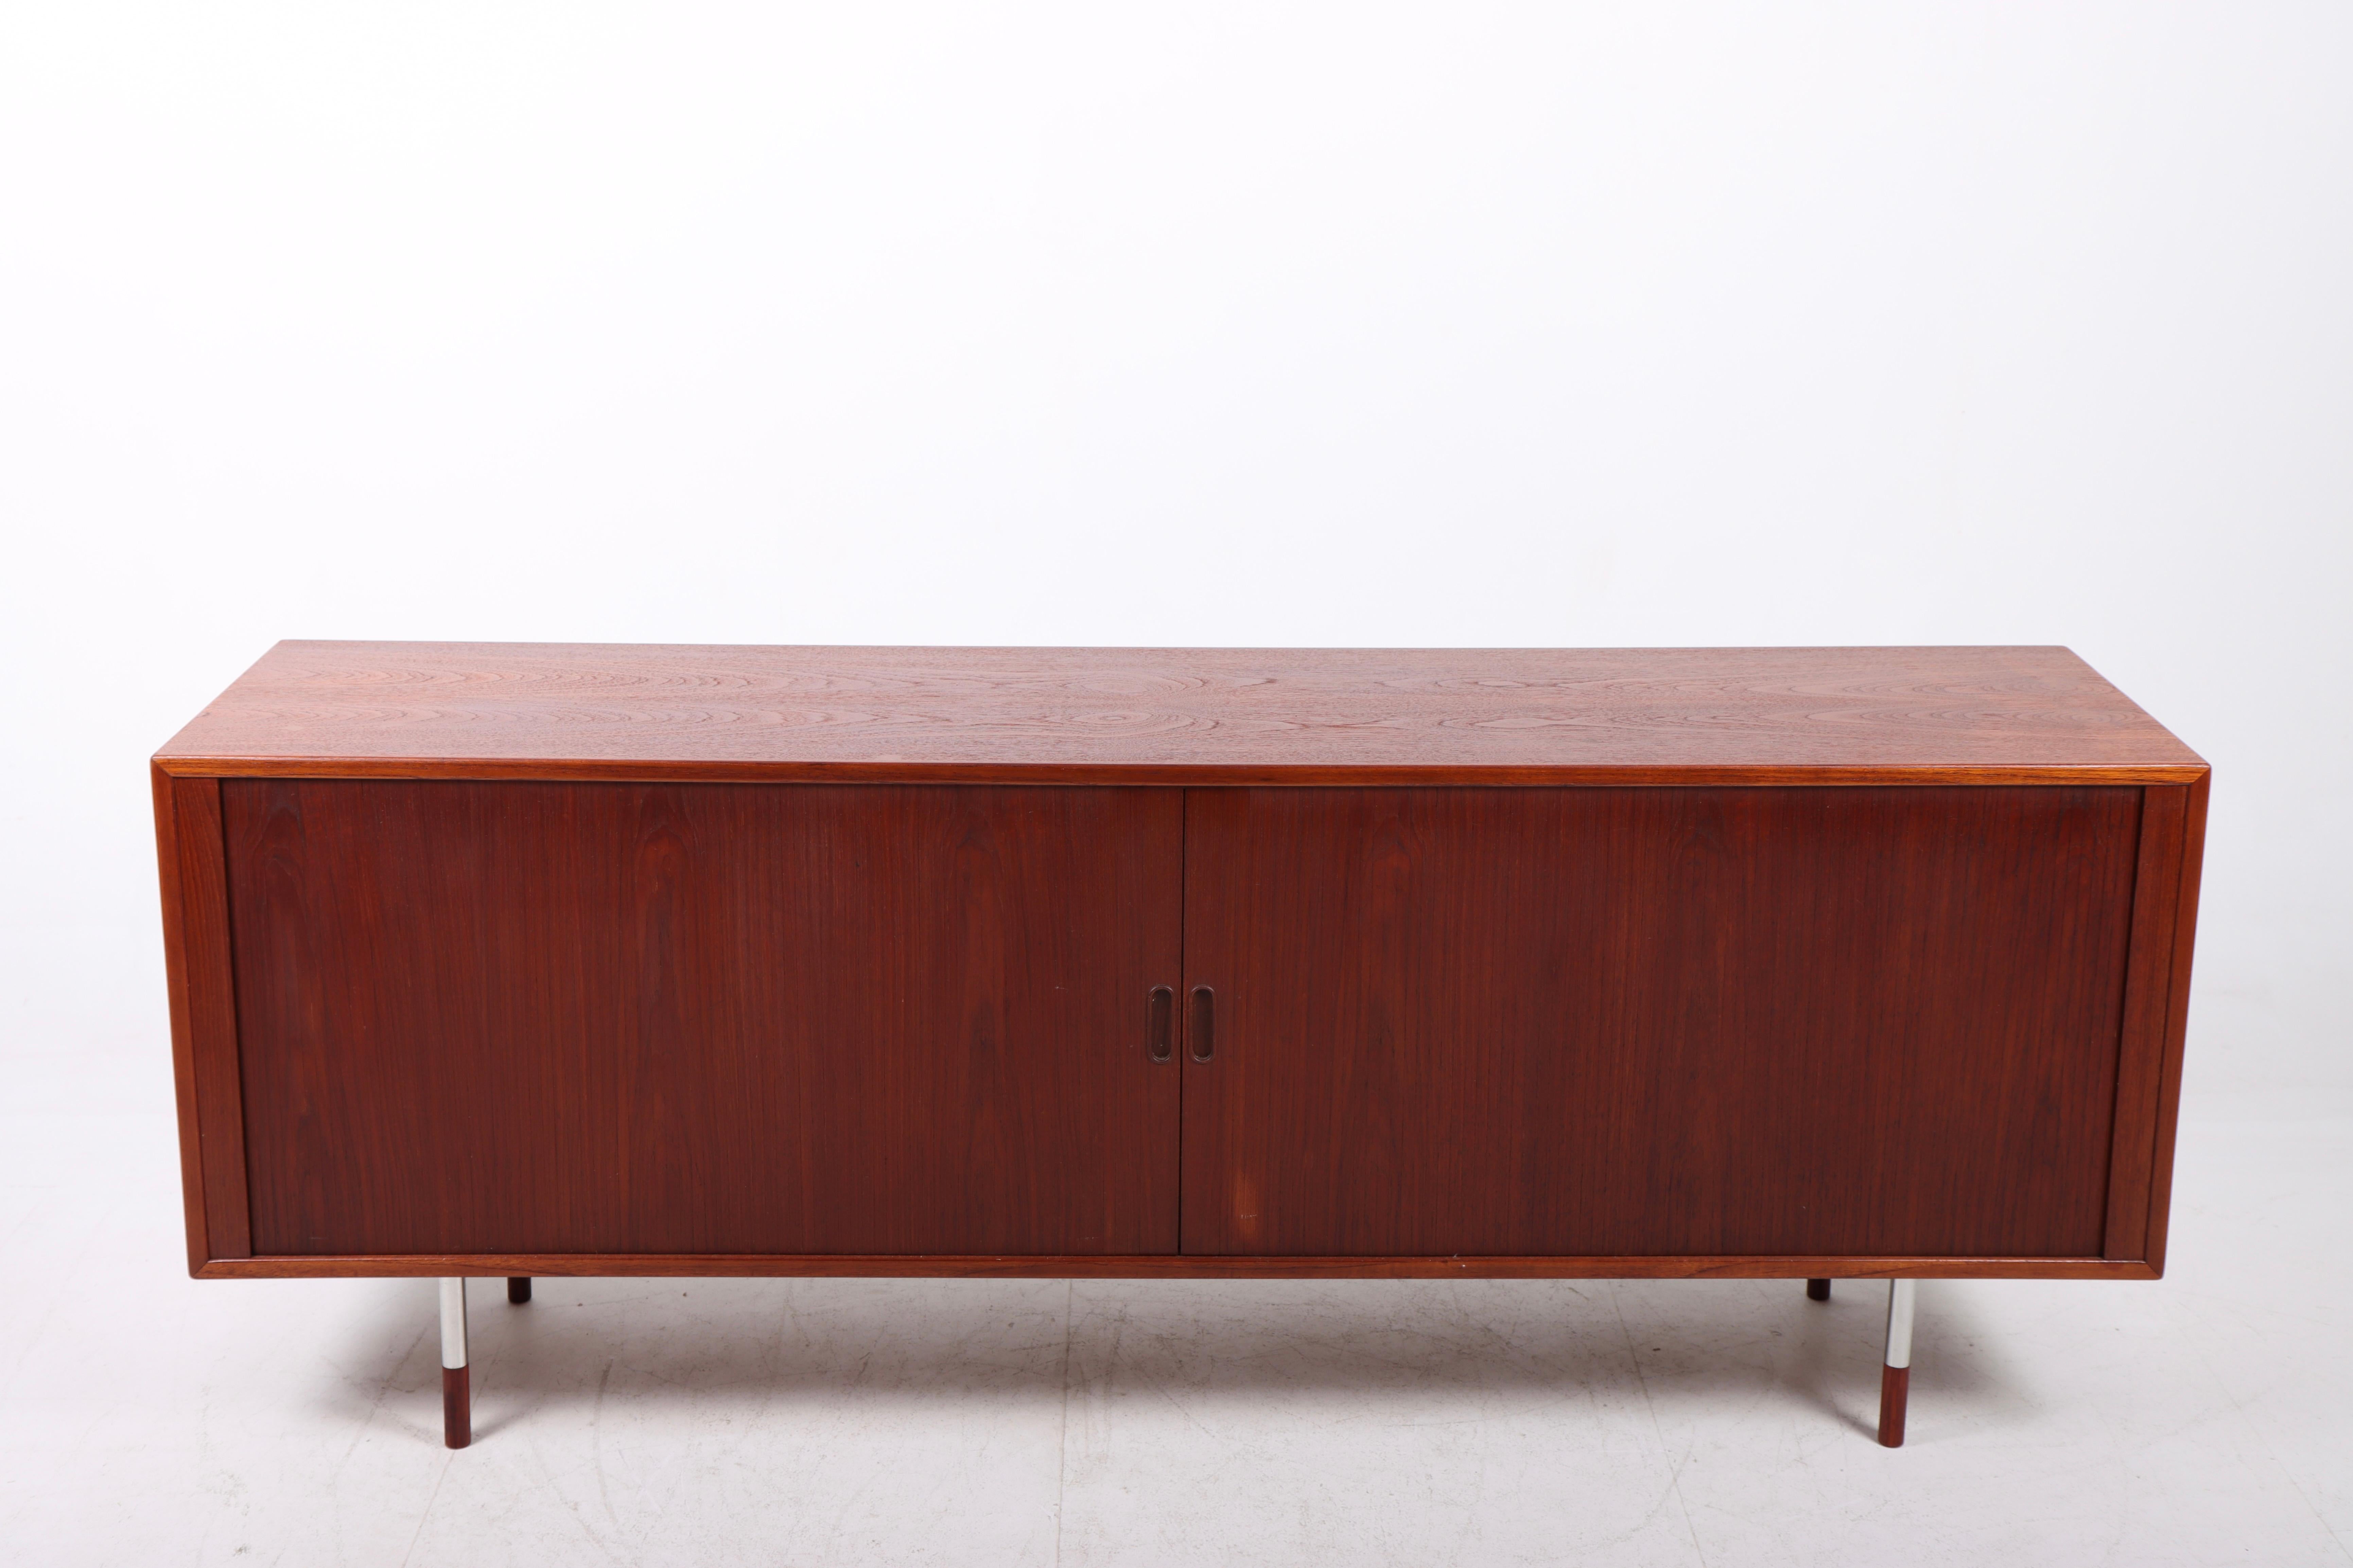 Sideboard in teak with tambour doors designed by Maa. Arne Vodder and made by Sibast furniture, 1960s. Great original condition.